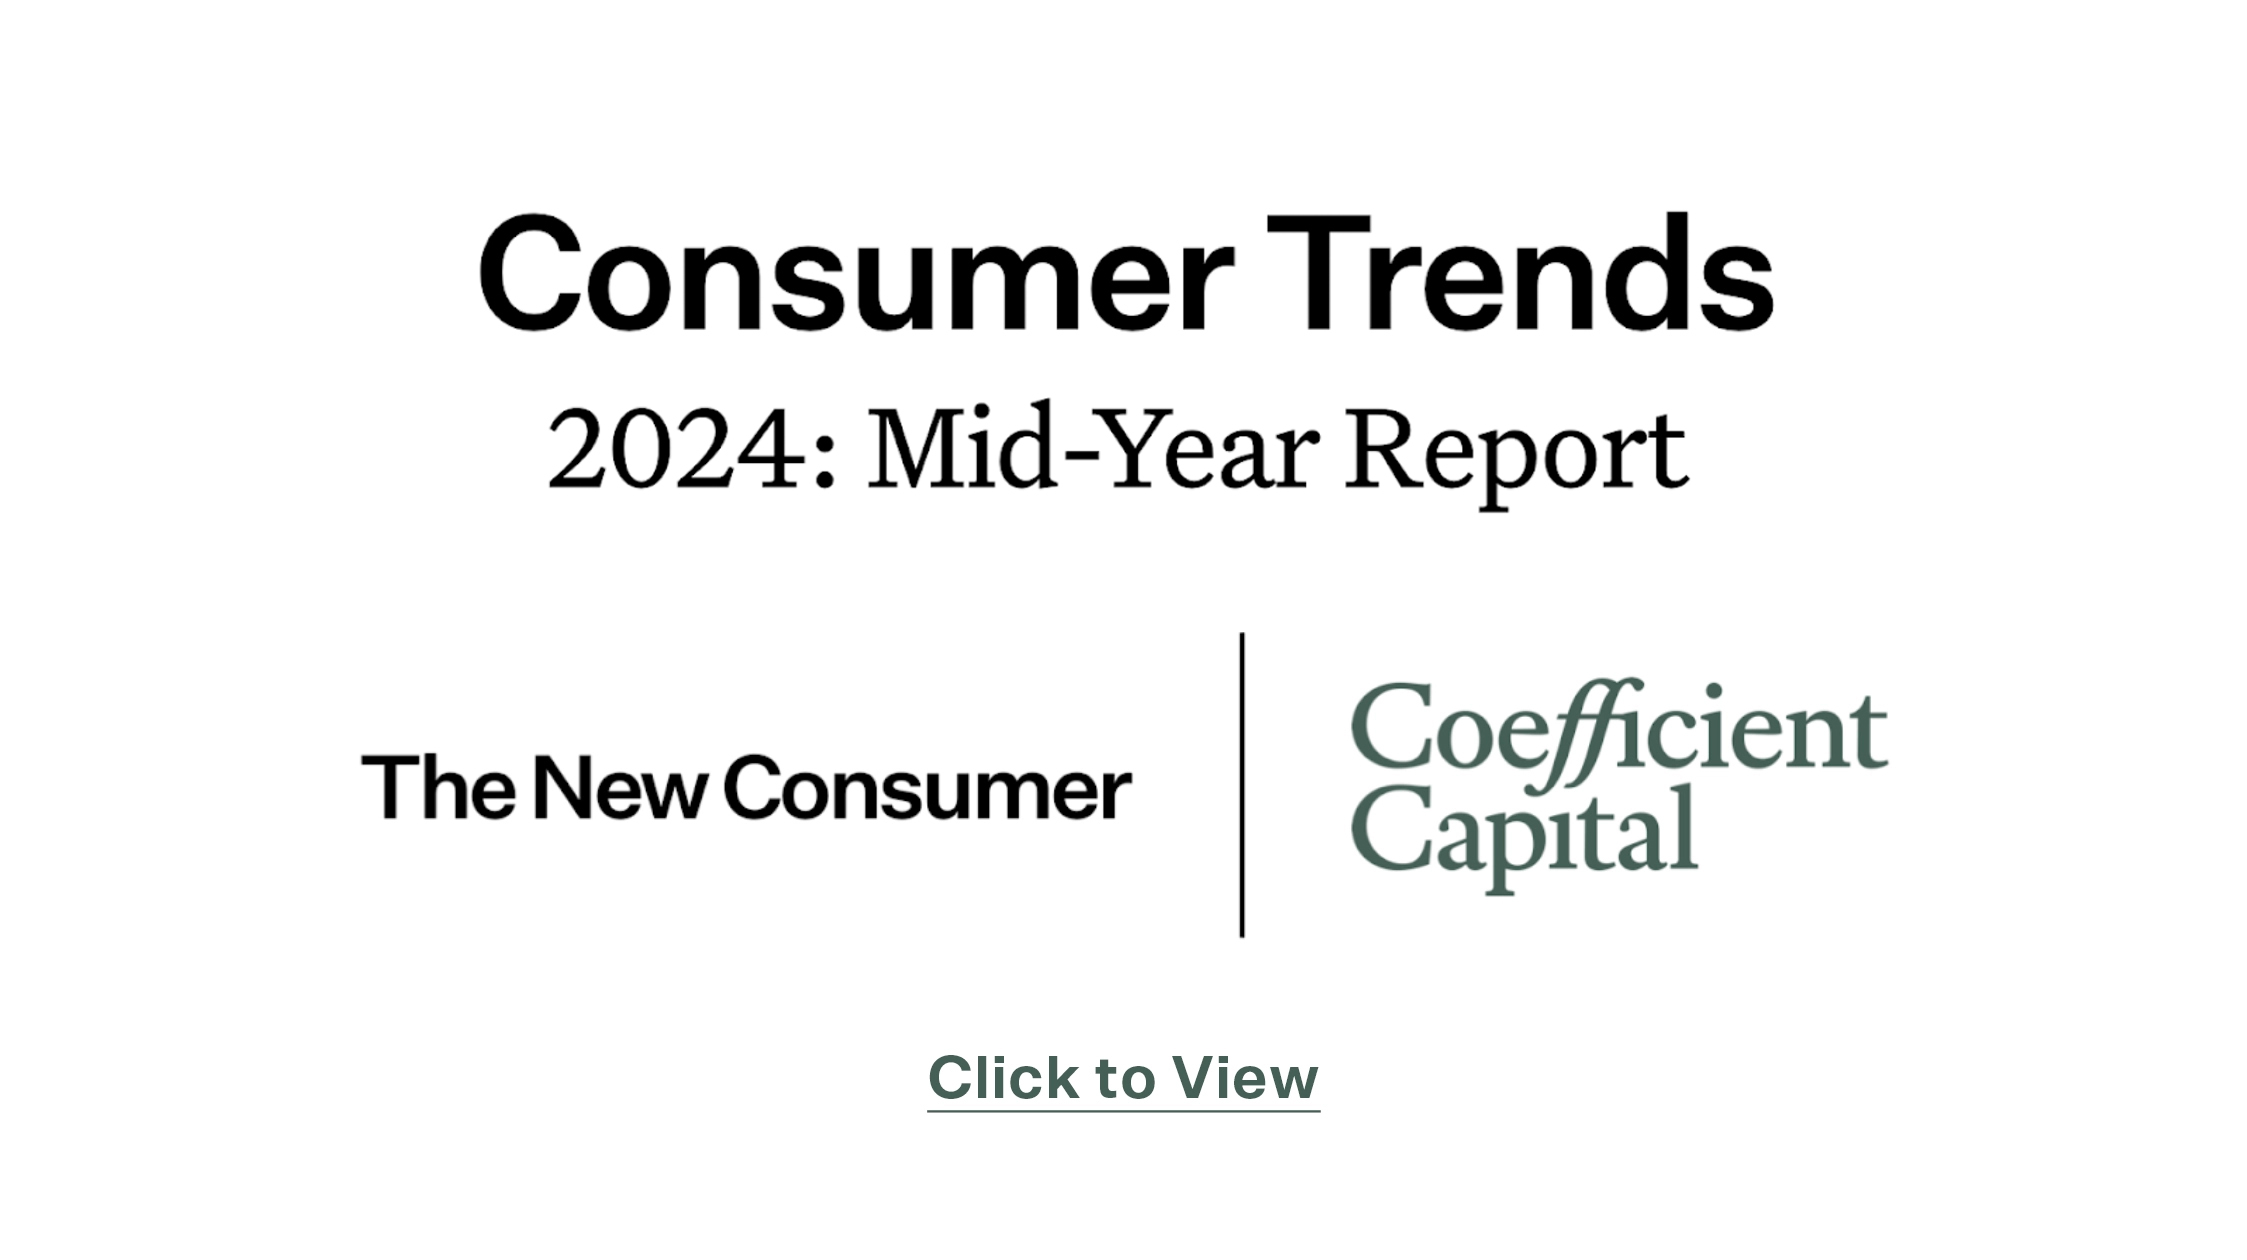 Consumer Trends 2024: Mid-Year Report